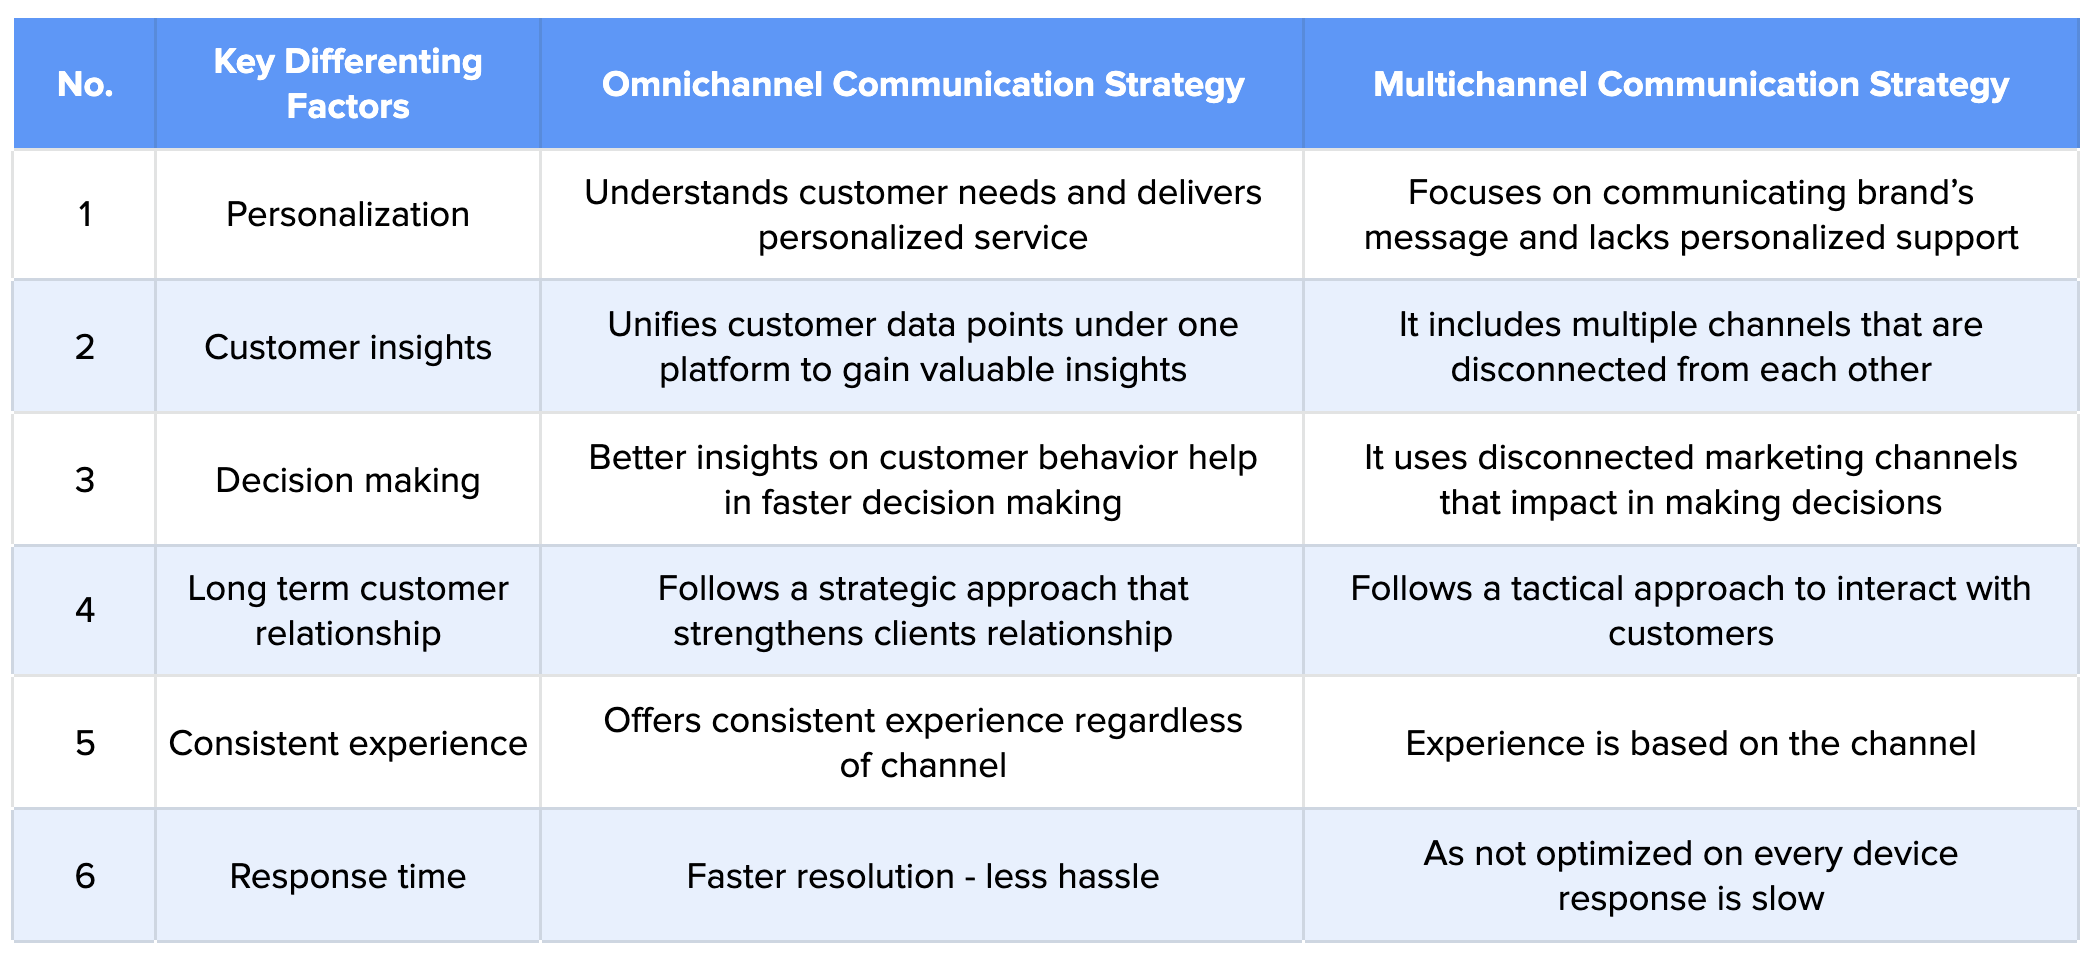 Omni channel vs Multichannel communication strategy - key differences